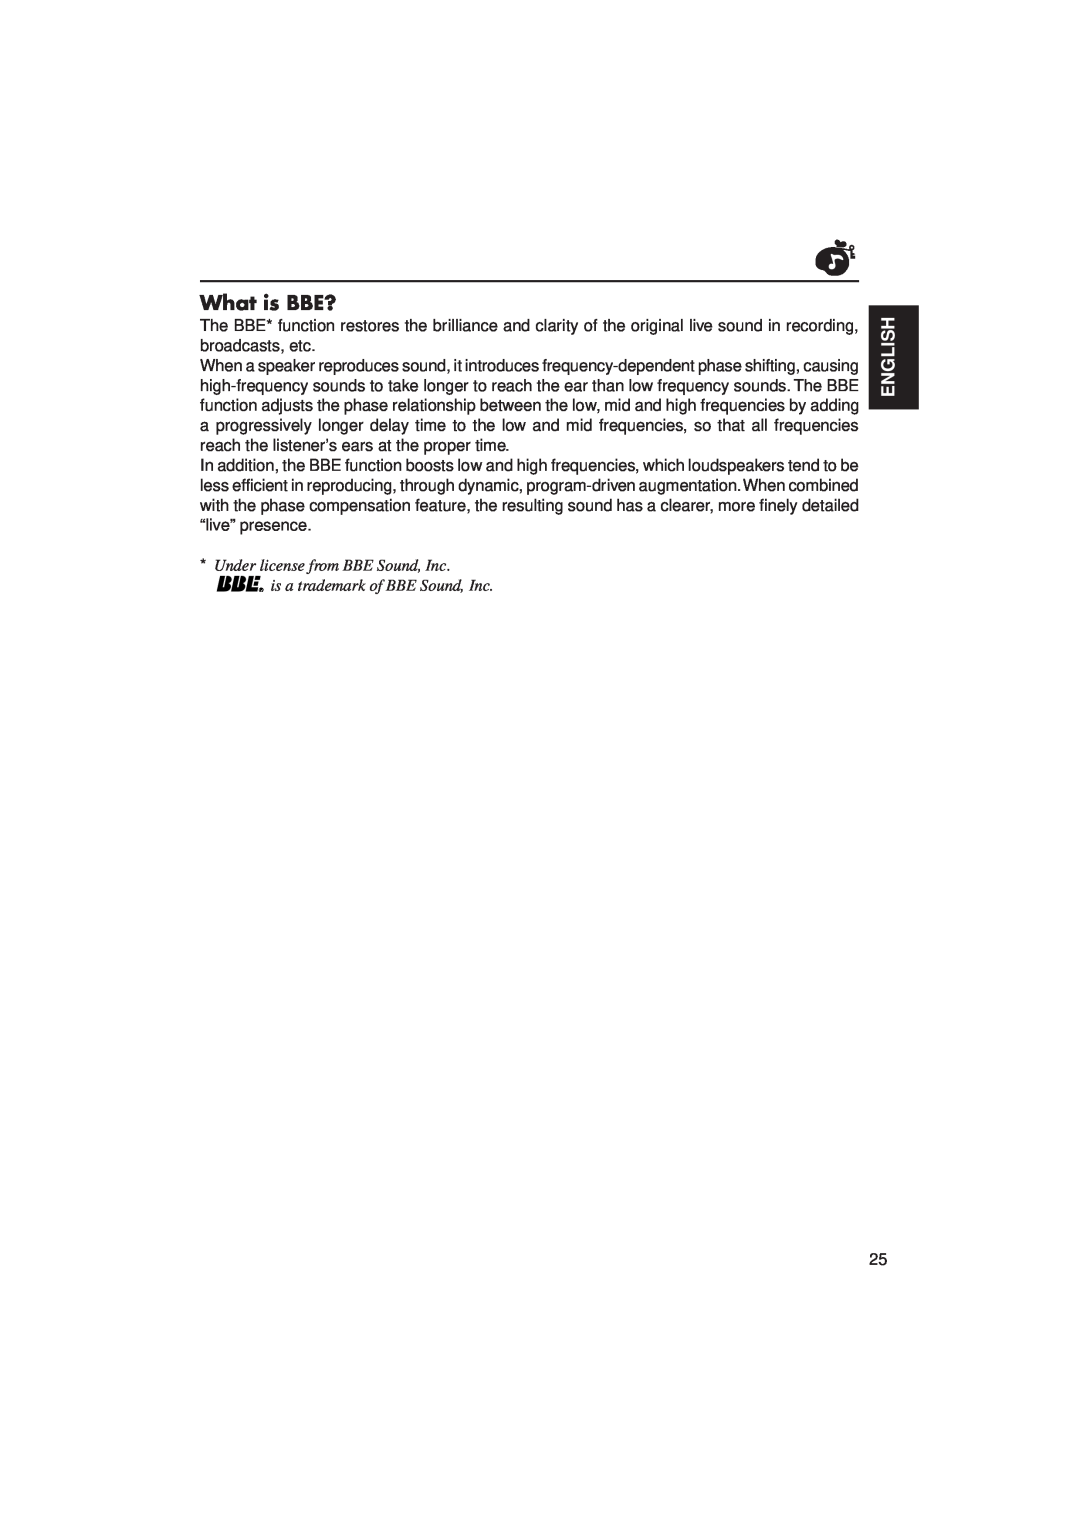 JVC KD-LX3R manual What is BBE?, English, Under license from BBE Sound, Inc, is a trademark of BBE Sound, Inc 